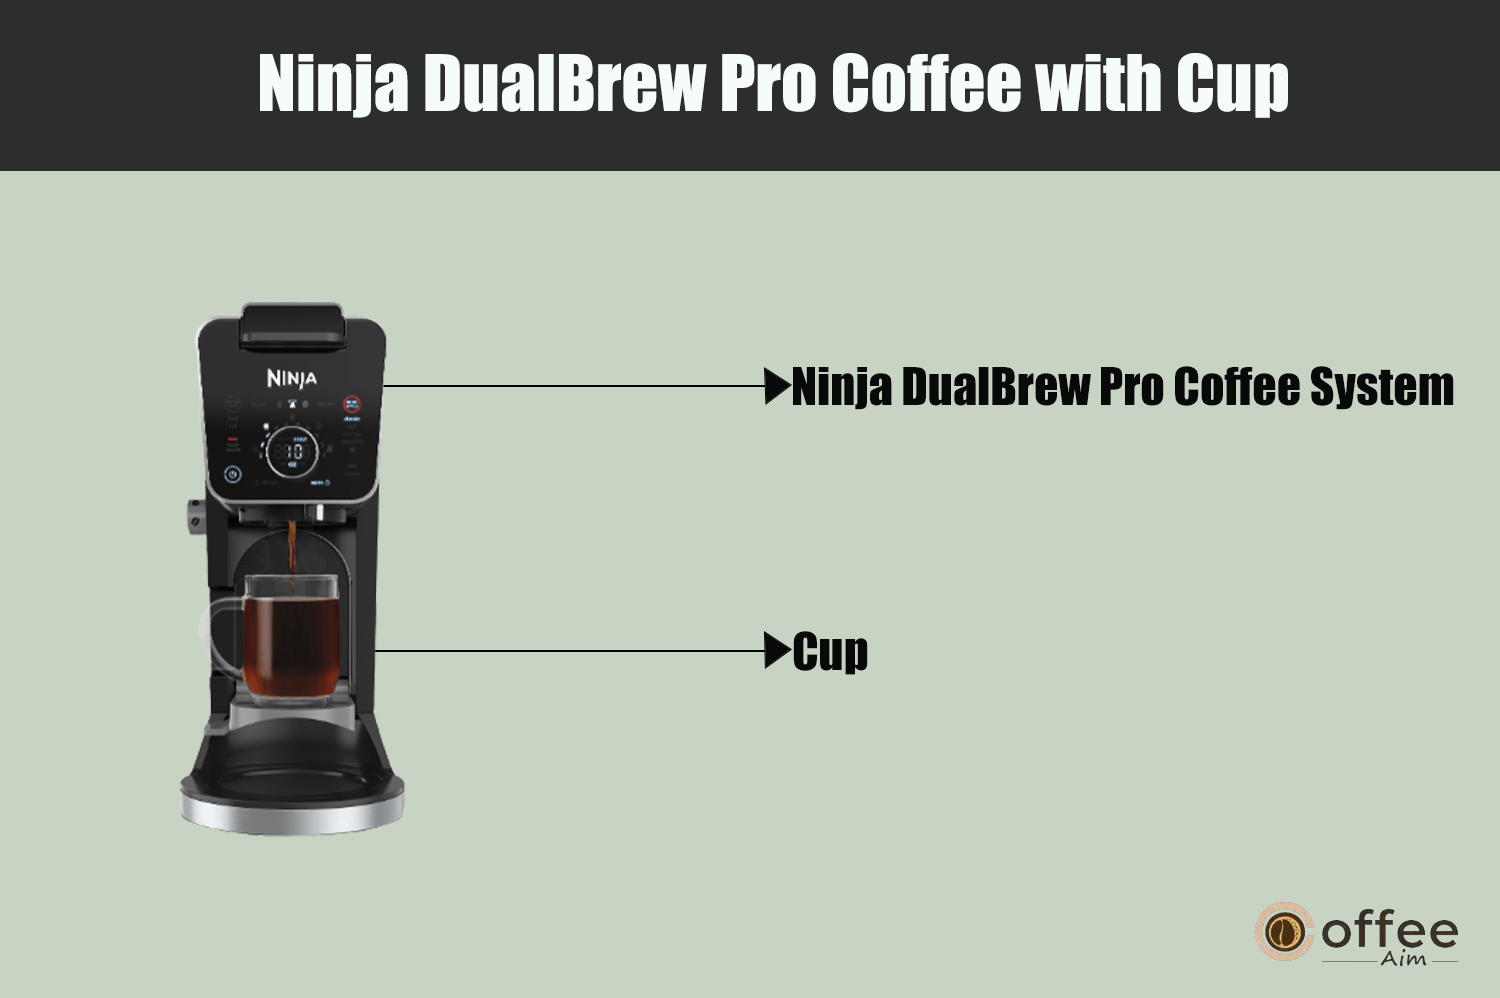 "This image features the cup used with the Ninja DualBrew Pro Specialty Coffee System, as presented in the article 'How to Use Ninja DualBrew Pro Specialty Coffee System, Compatible with K-Cup Pods, and 12-Cup Drip Coffee Maker.'"